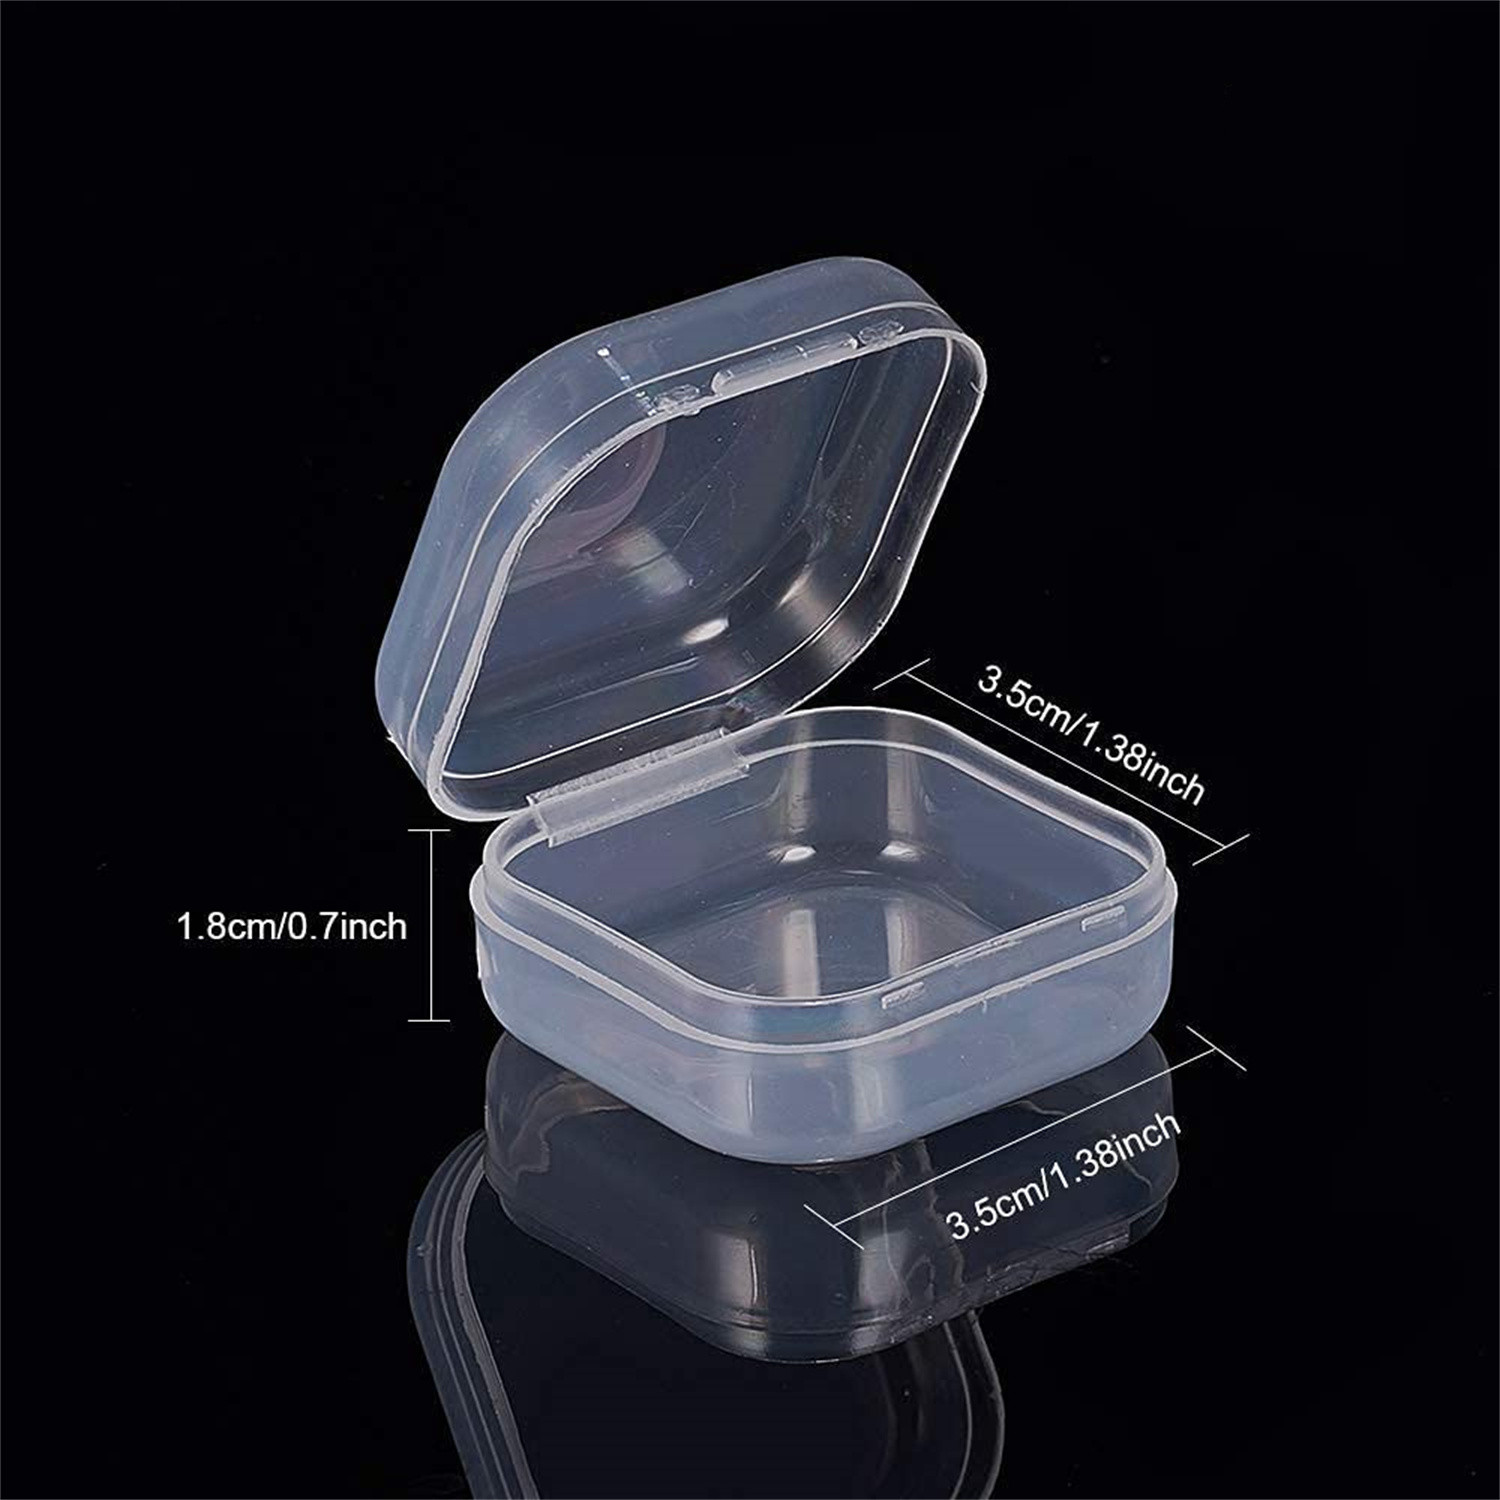 50 Pcs Clear Small Plastic Storage Containers Anti Oxidation